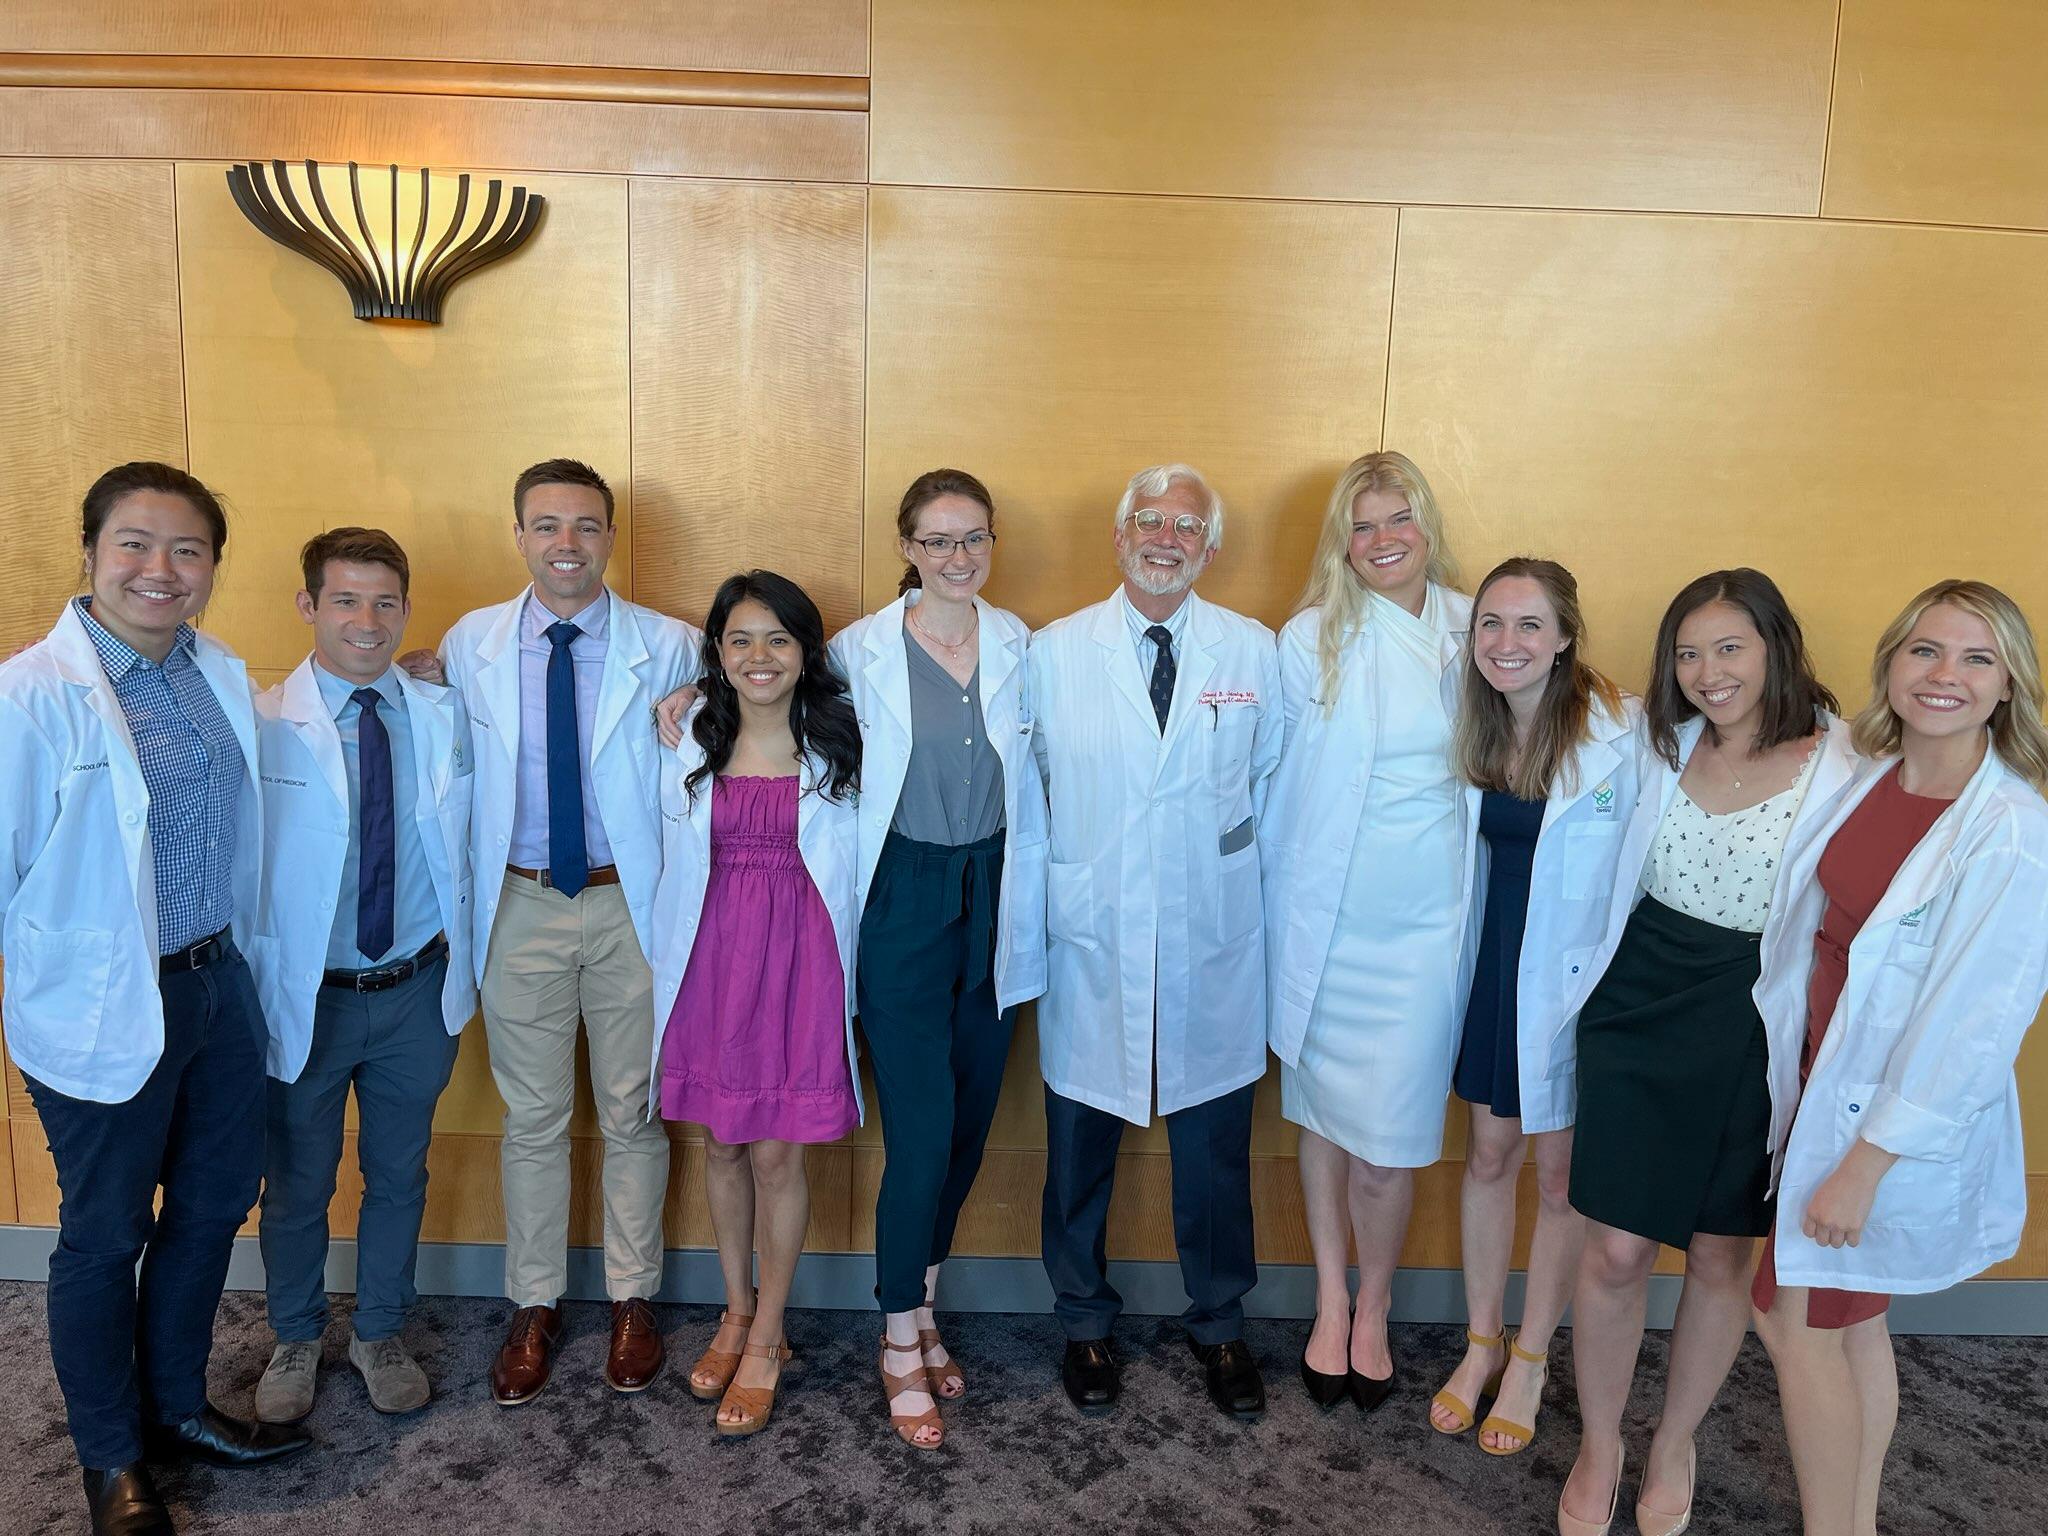 MD/PhD Program Director with 9 students in white coats